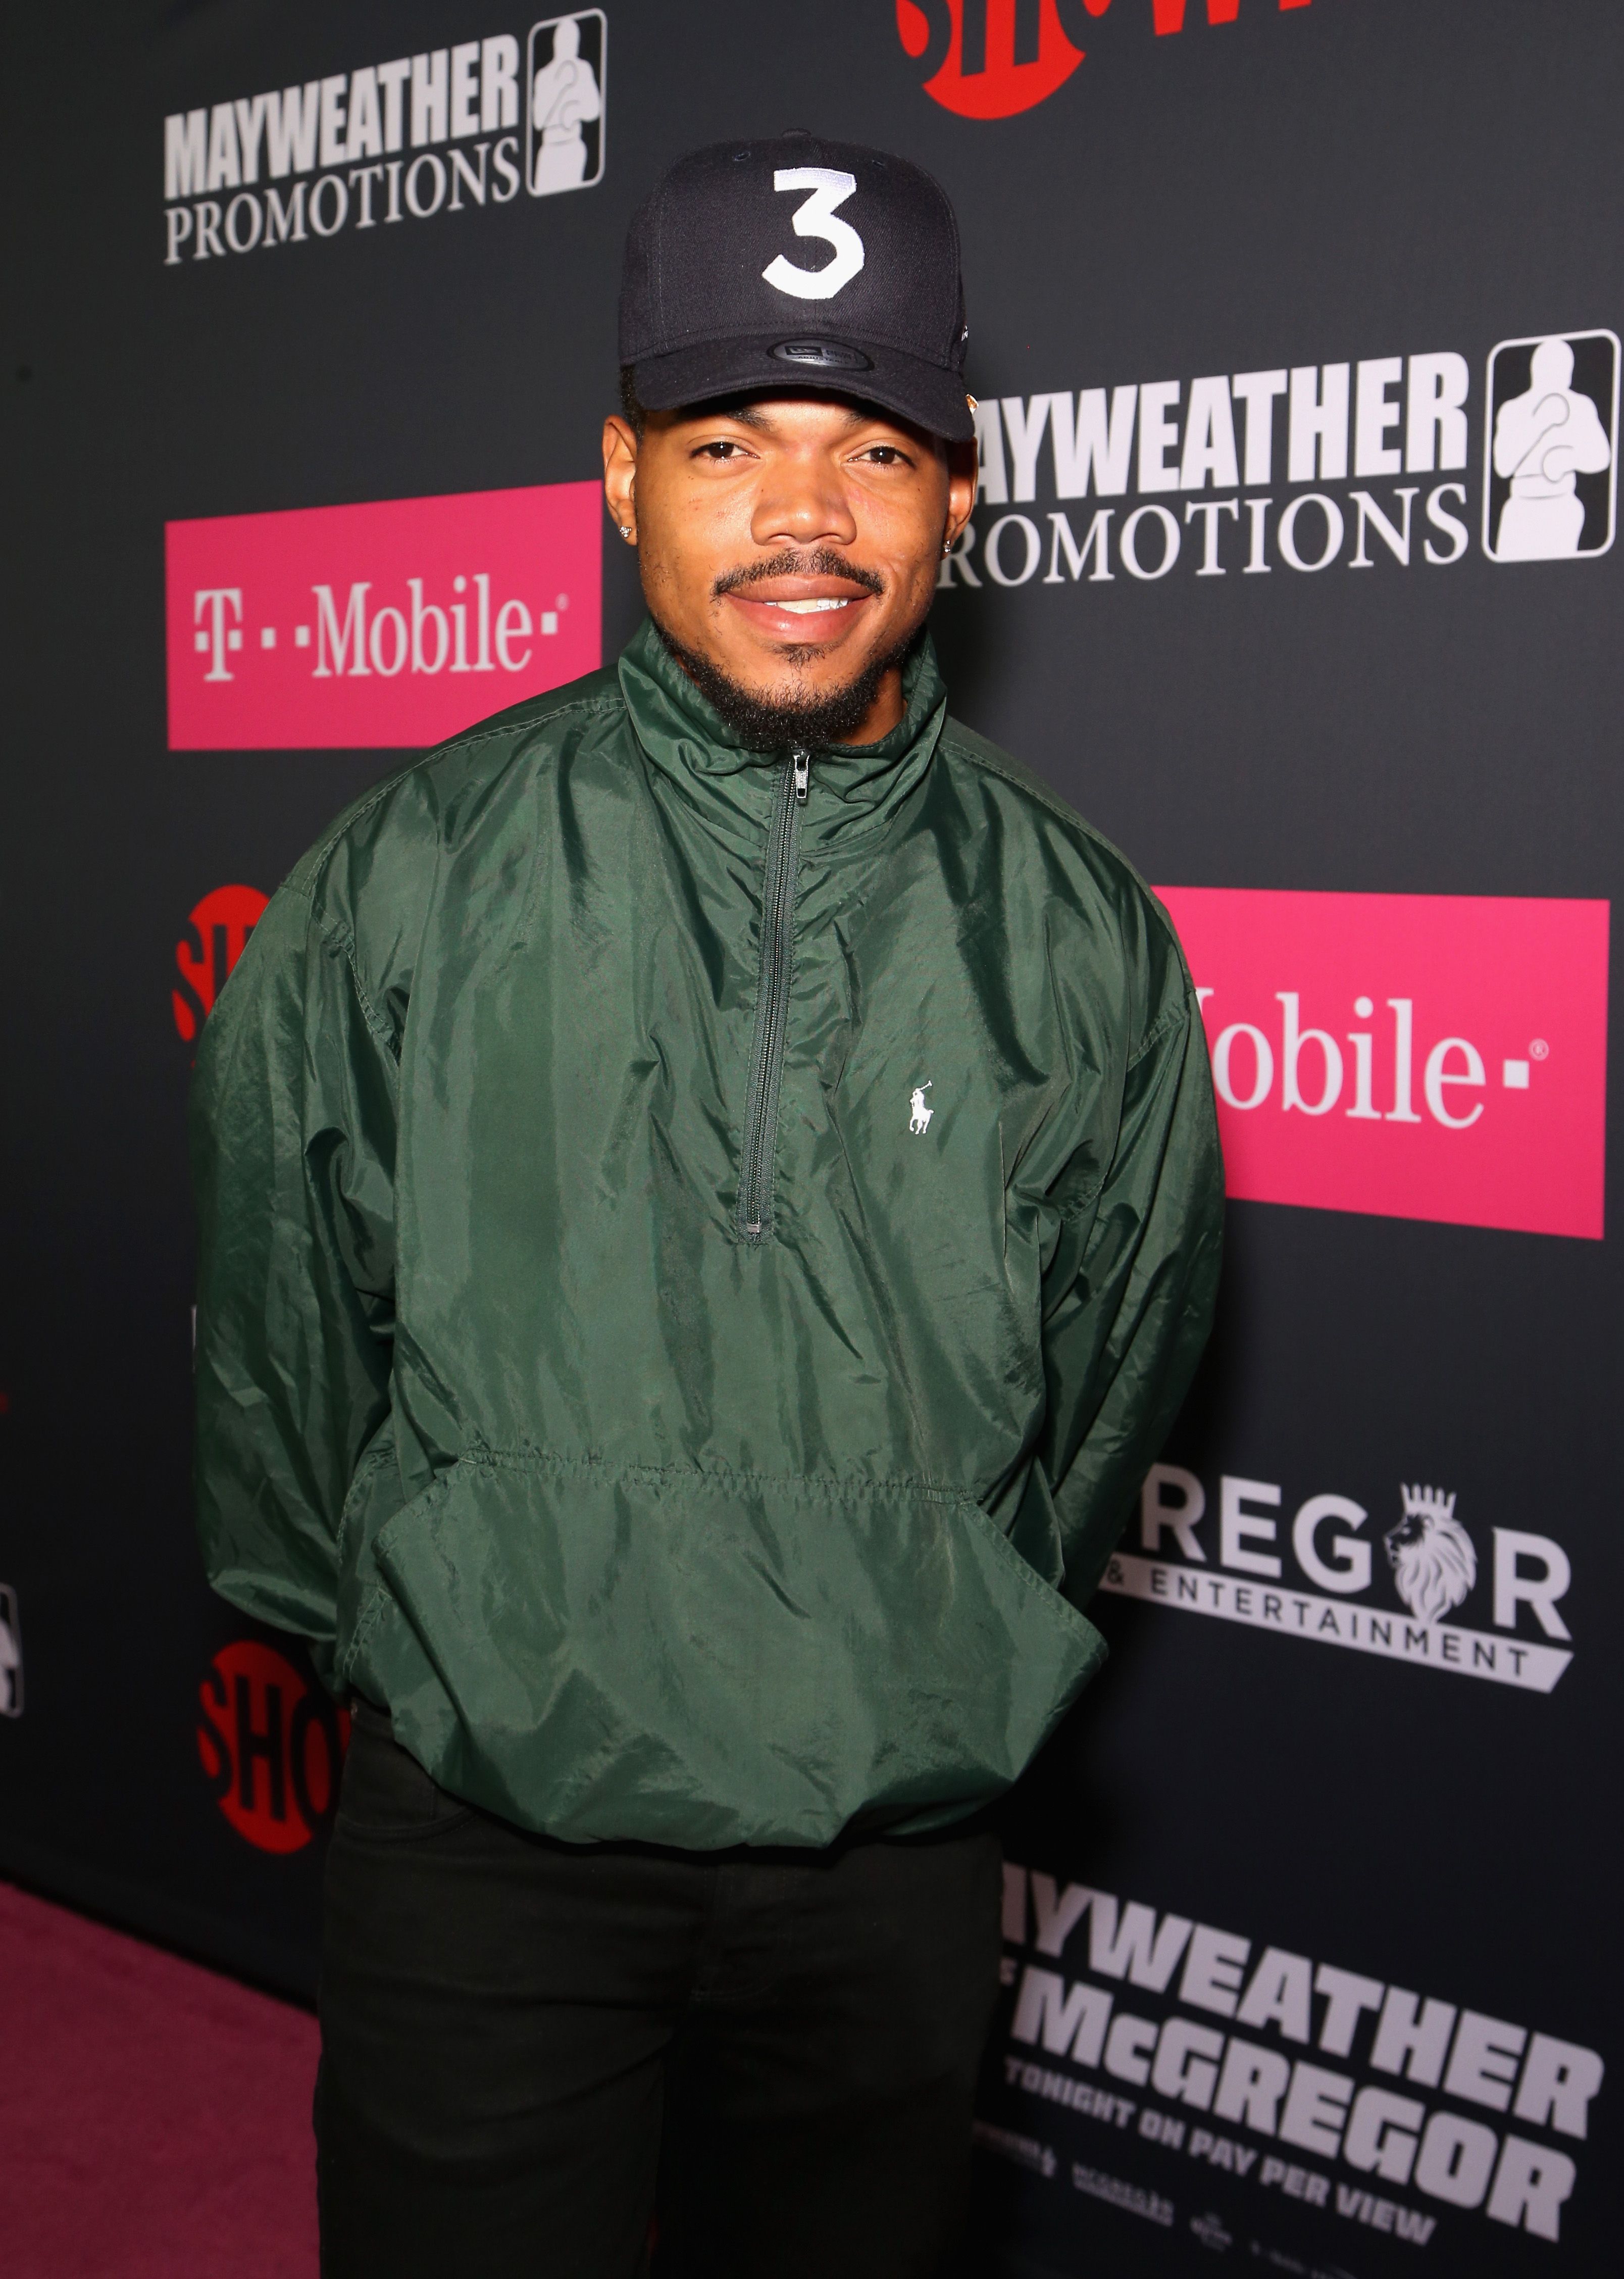 Chance The Rapper arrives at the Showtime, WME IME and Mayweather Promotions VIP Pre-Fight Party for Mayweather vs. McGregor on August 26, 2017 | Photo: Getty Images